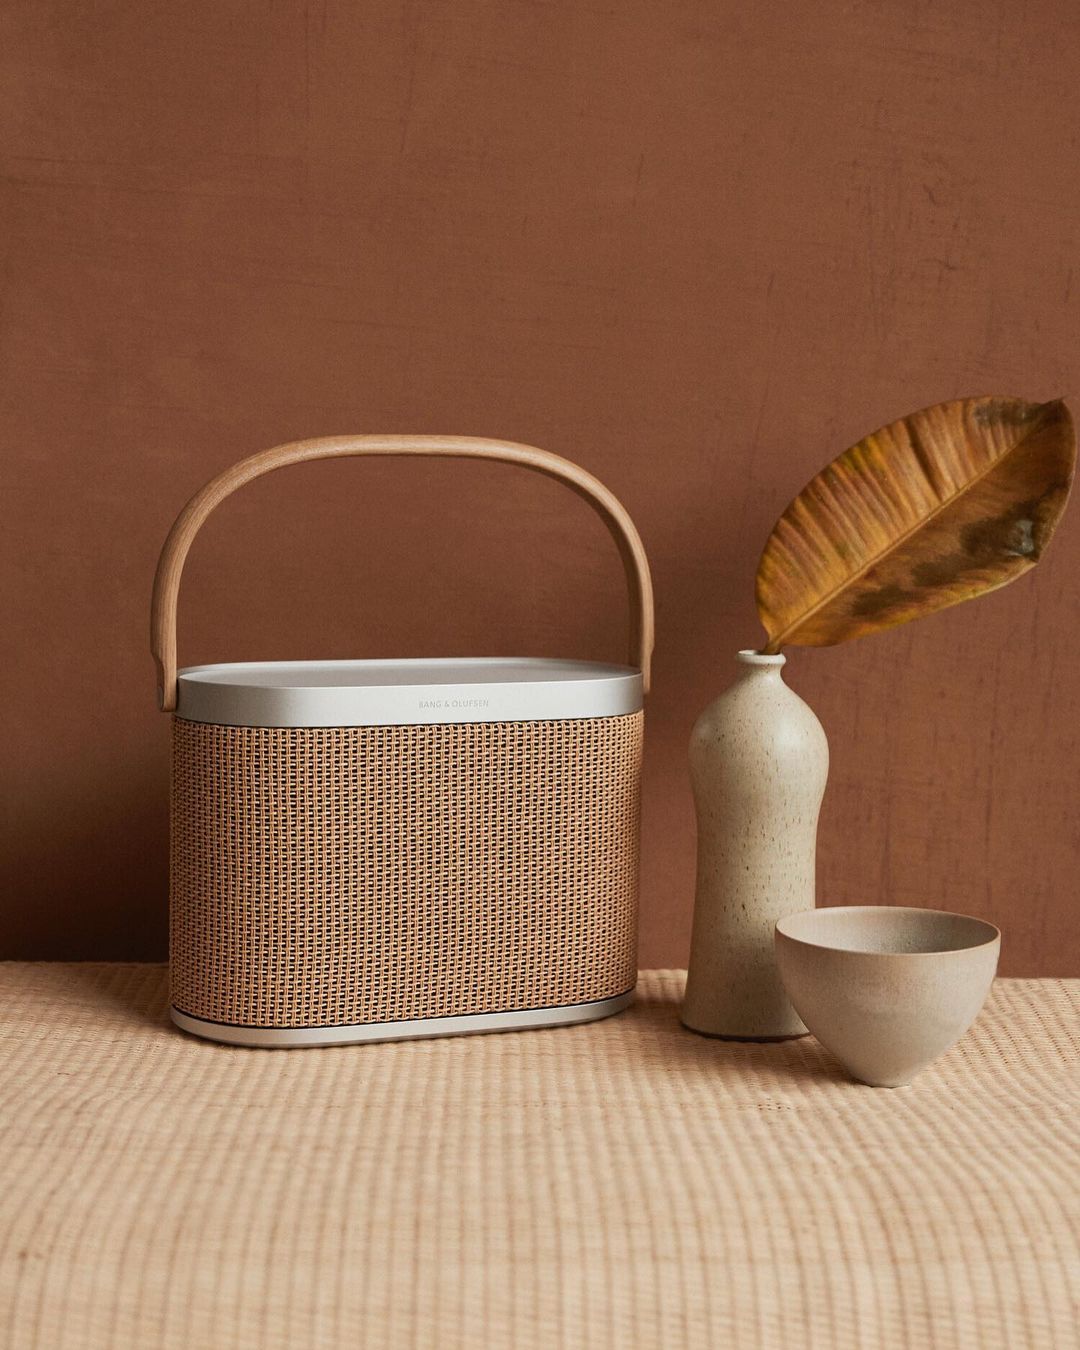 Lifestyle image of a bronze and silver Bang Olufsen speaker with a wooden handle. It sits on table covered in a beige table cloth. Beside it are some ceramics for decoration.